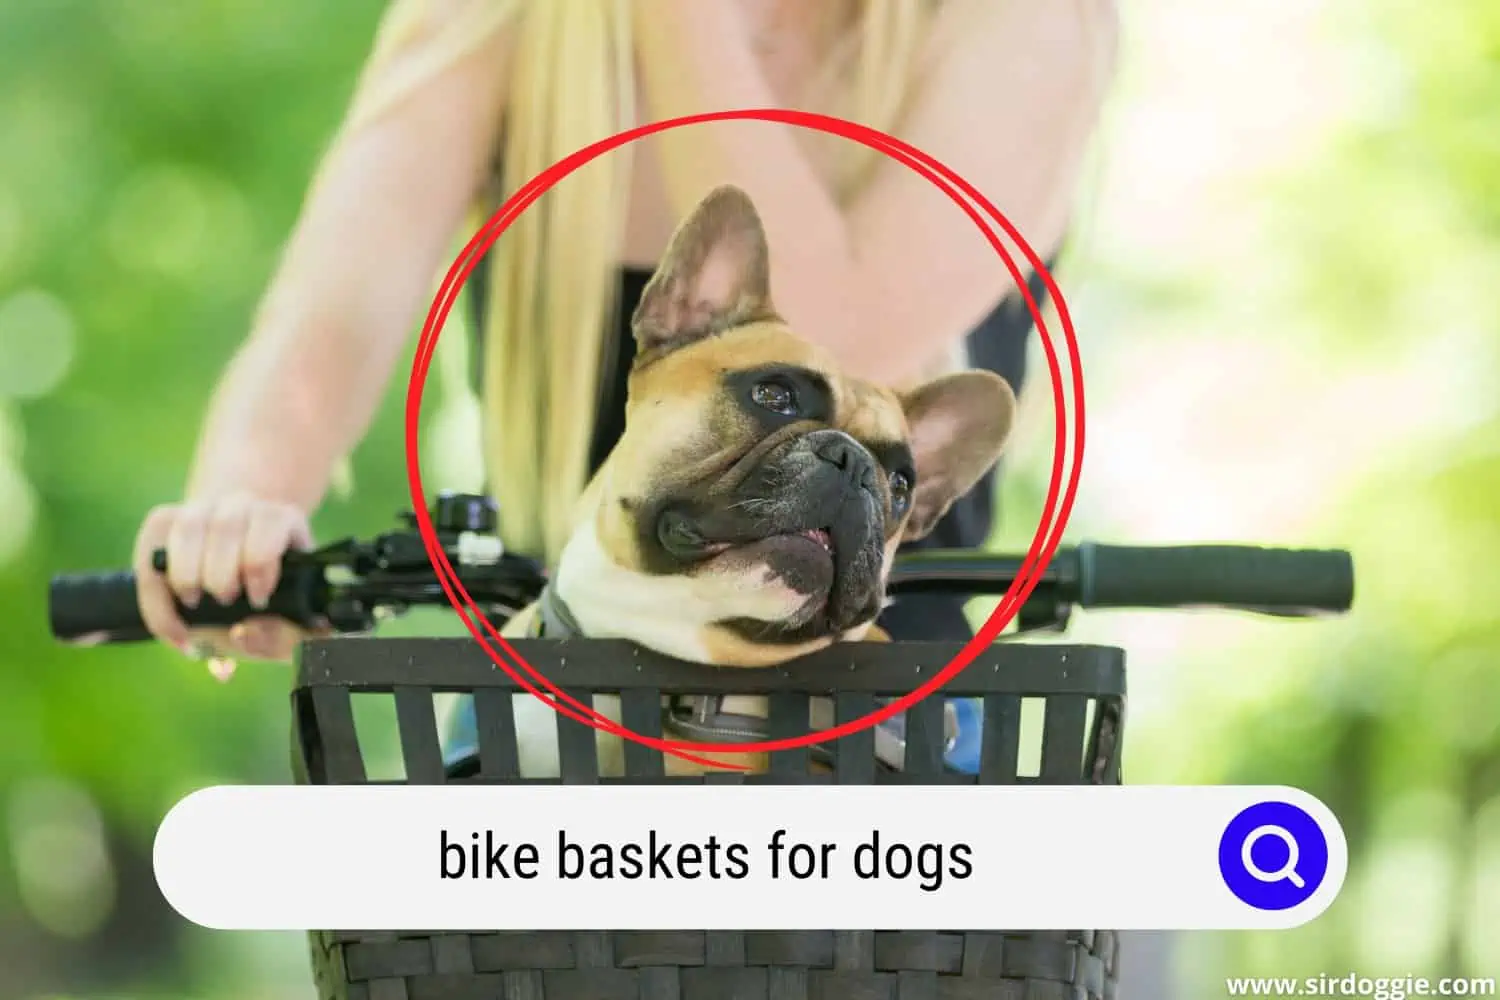 woman riding a bike with dog in a basket